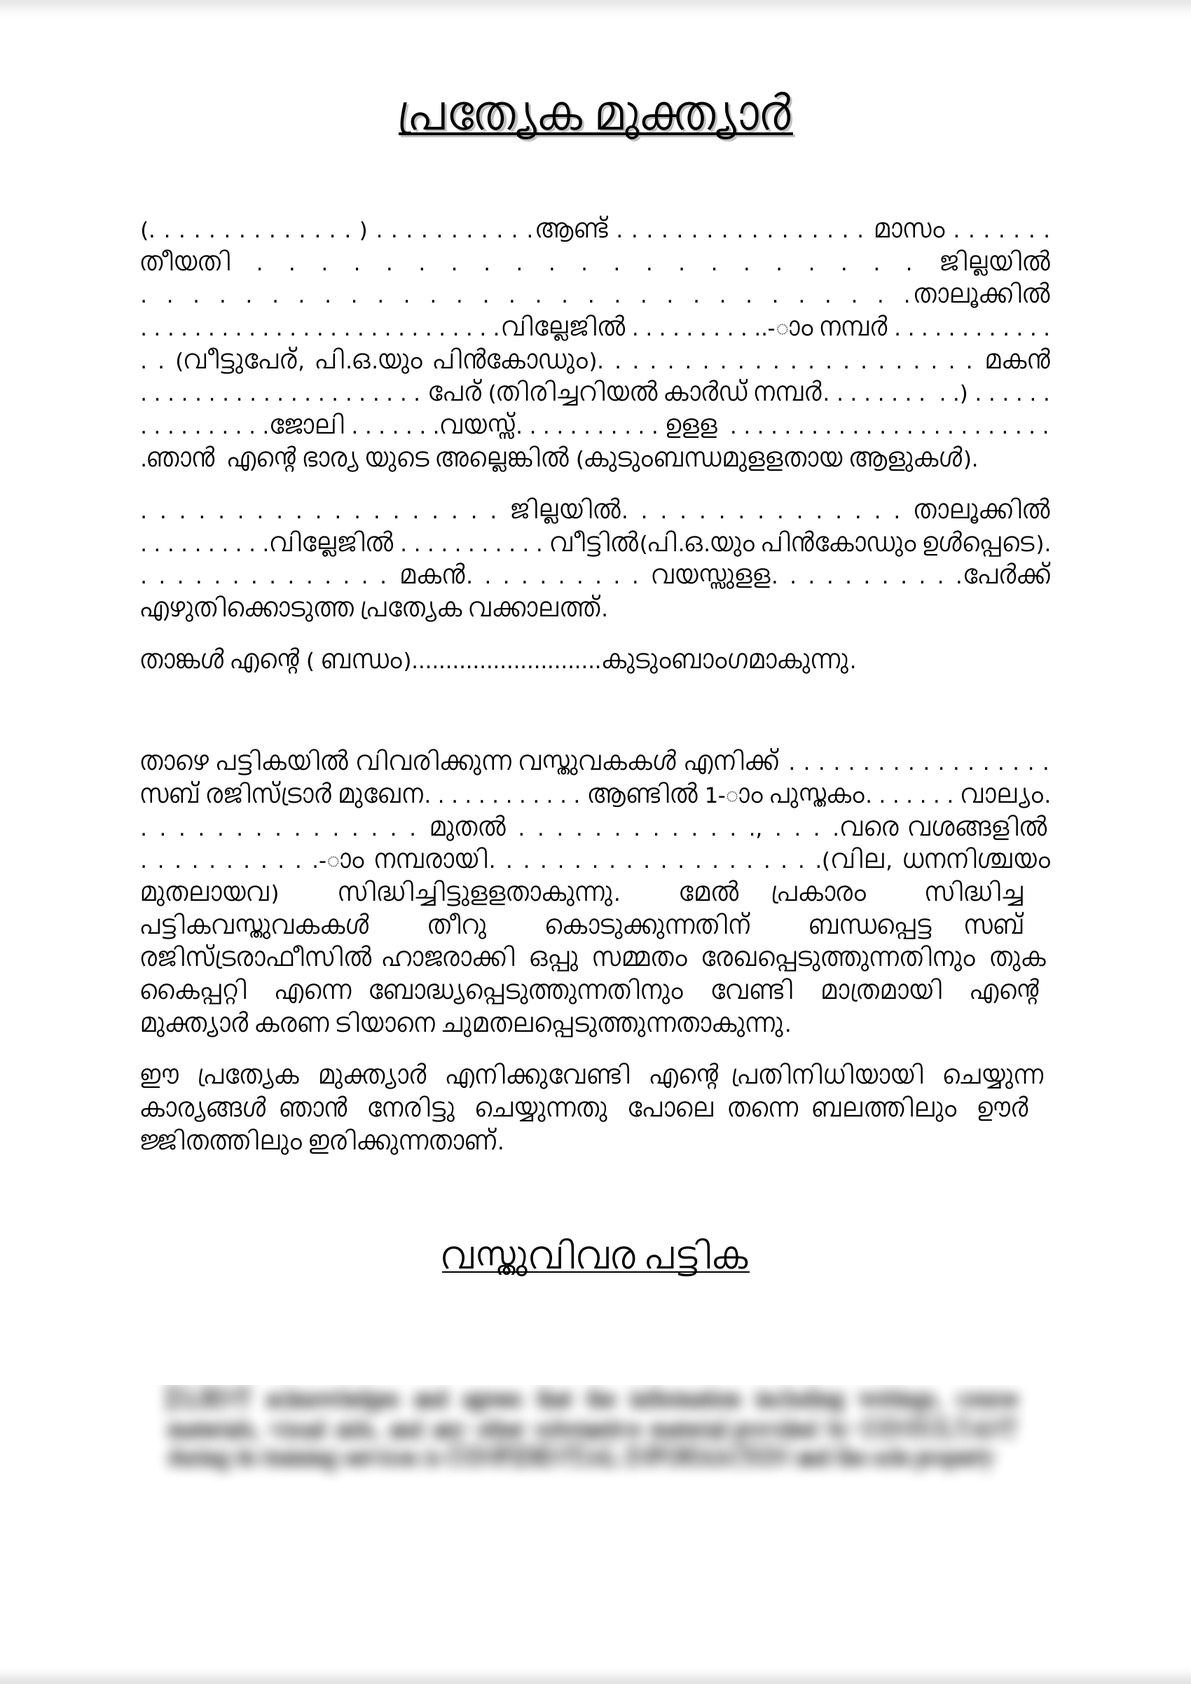 Special power of attorney - In malayalam Language -0